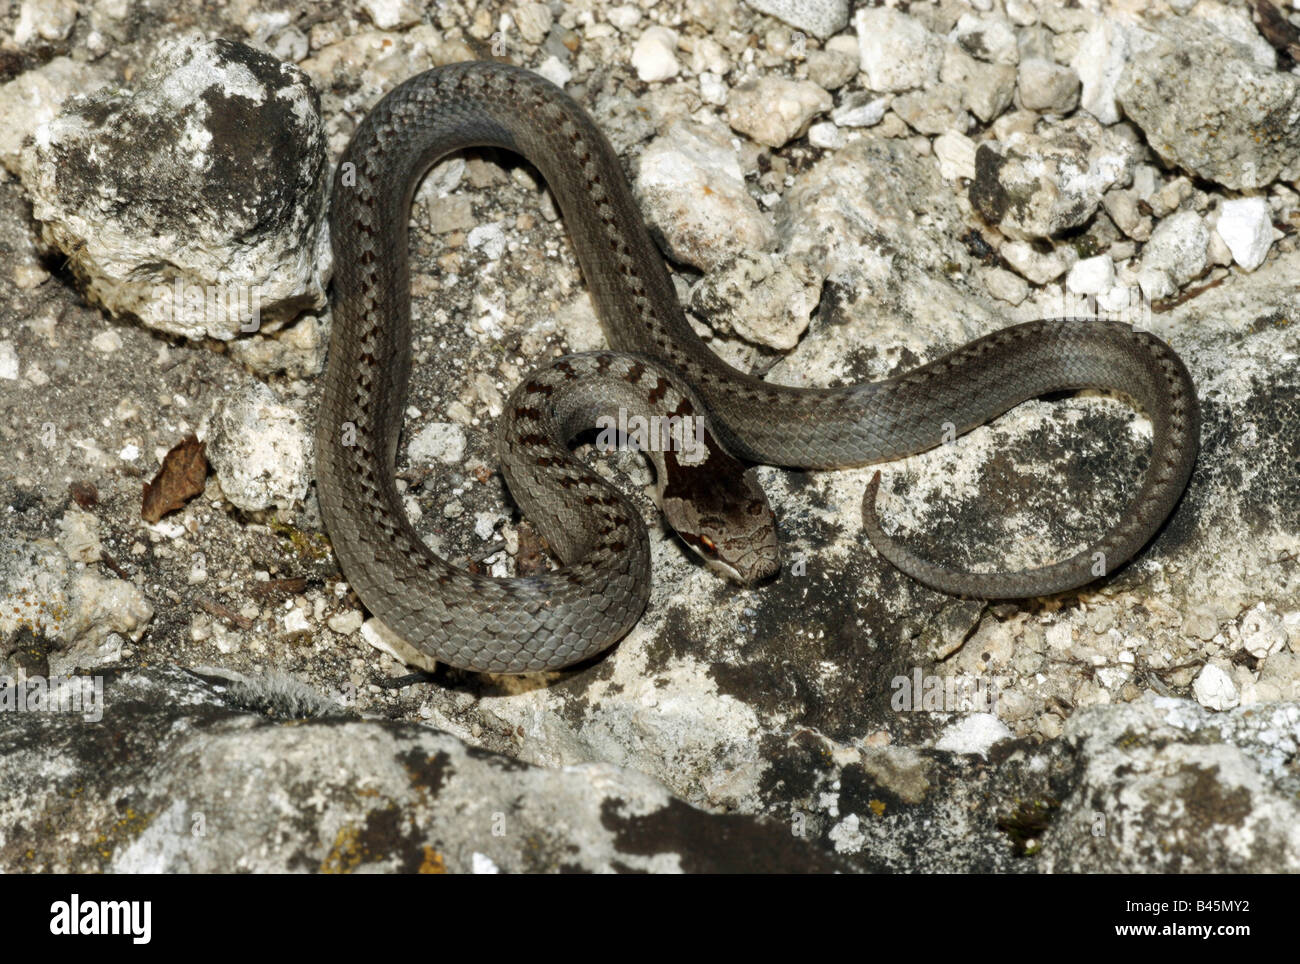 zoology / animals, reptile, Colubridae, Smooth snake (Coronella austriaca), on rock, Neusiedler See, Austria, distribution: Europe, western Asia, Additional-Rights-Clearance-Info-Not-Available Stock Photo